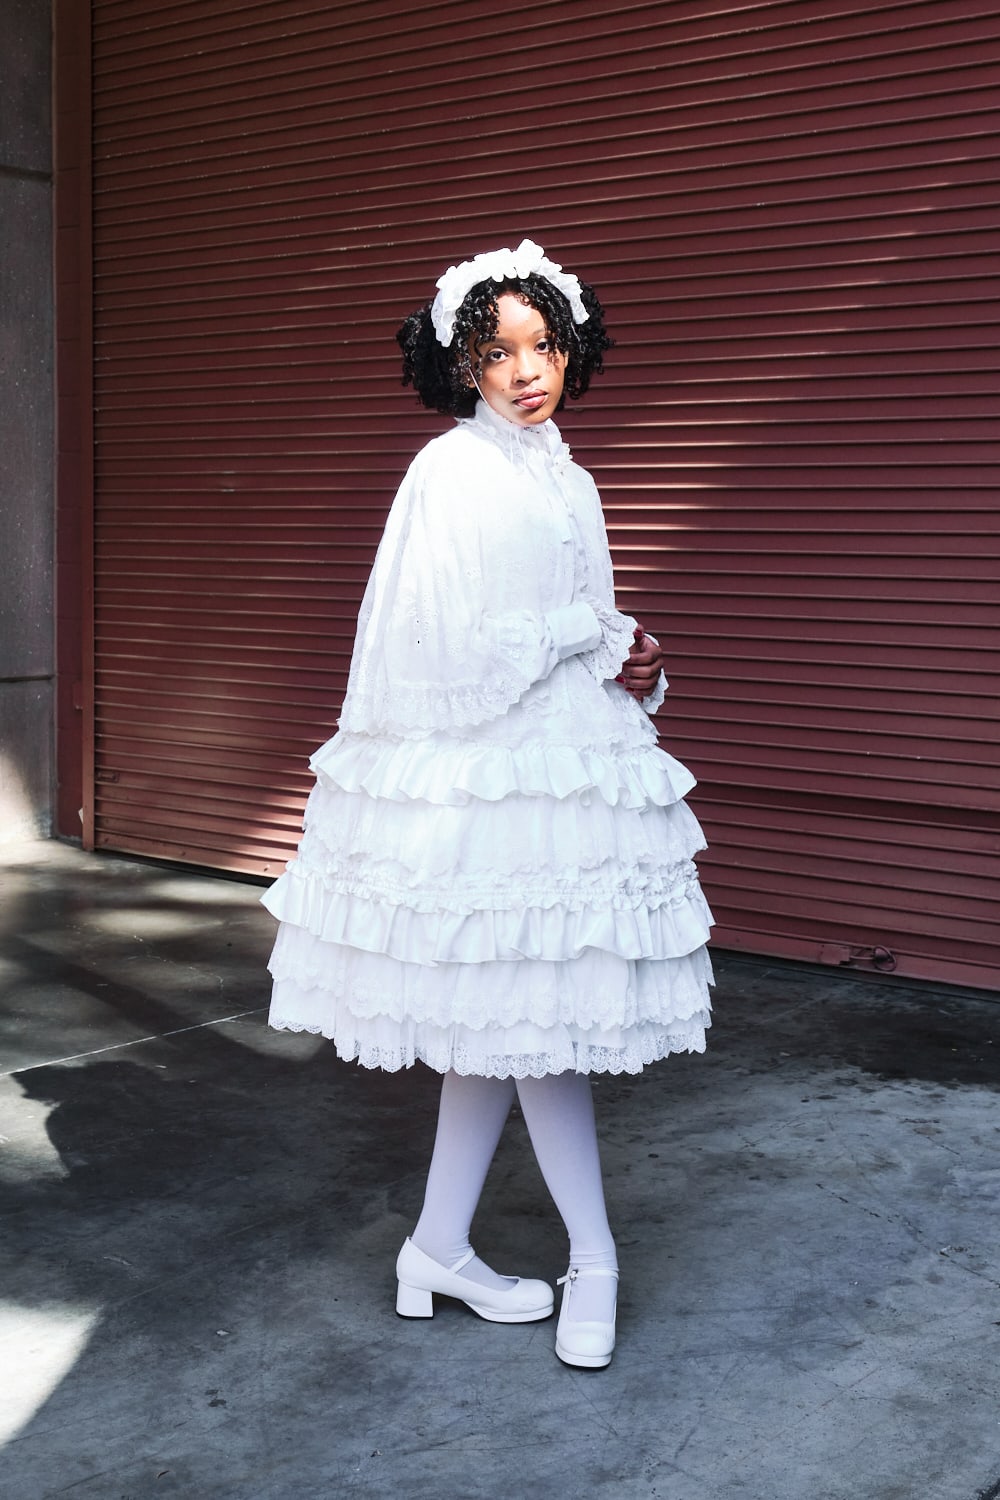 Atelier Pierrot classic lolita model wearing an all white collaboration set of a lace capelet and dress set - full body standing pose 5.